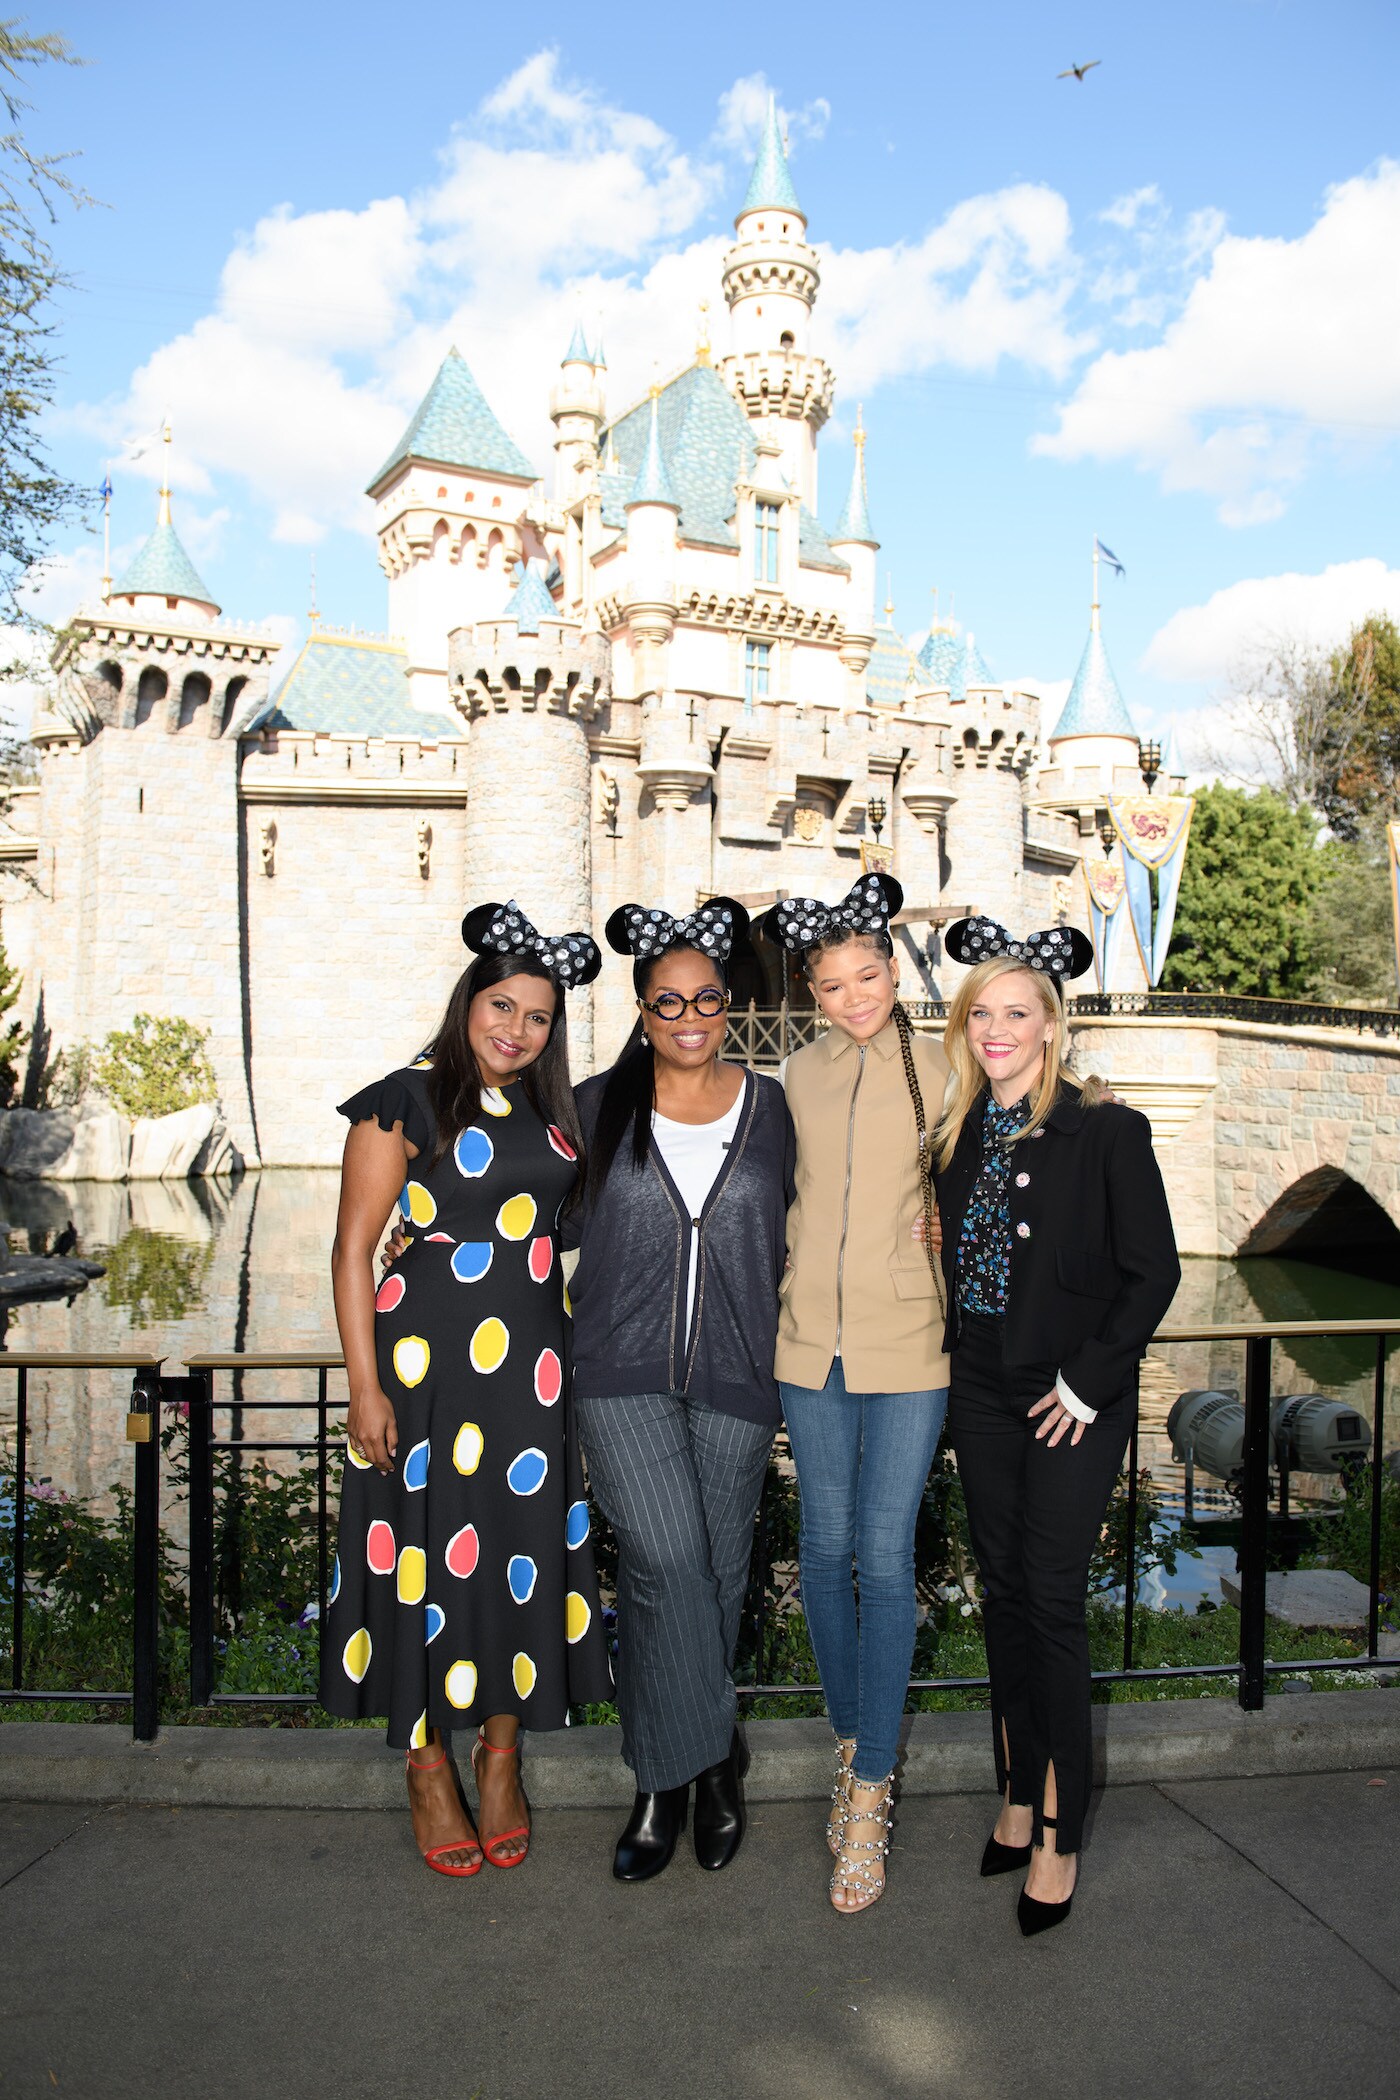 The Cast of A Wrinkle in Time at the Disneyland Resort